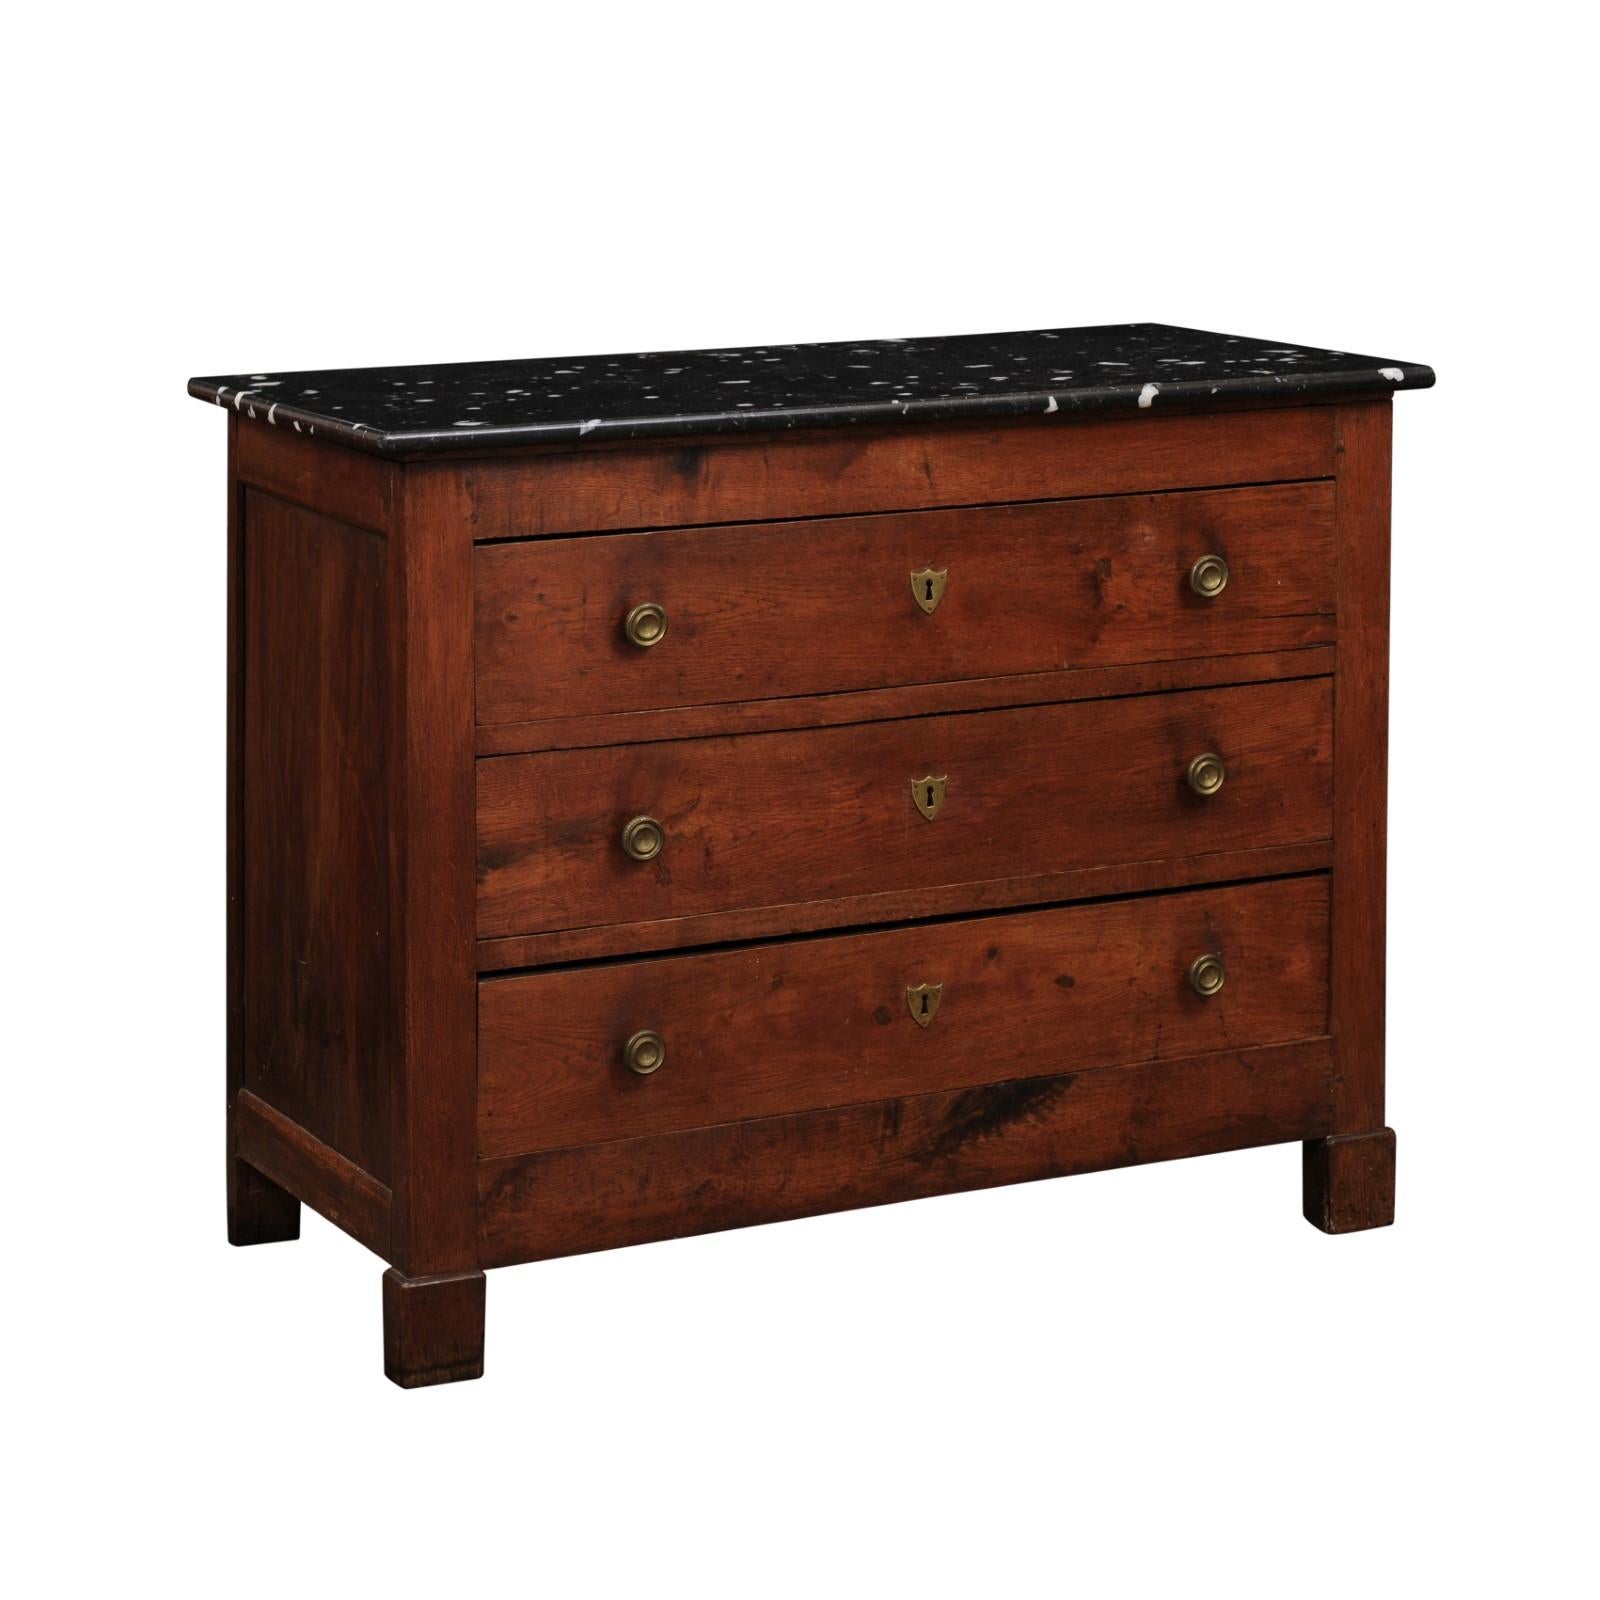 19th Century French Empire Provincial Ash Commode with Black Marble Top In Good Condition For Sale In Atlanta, GA